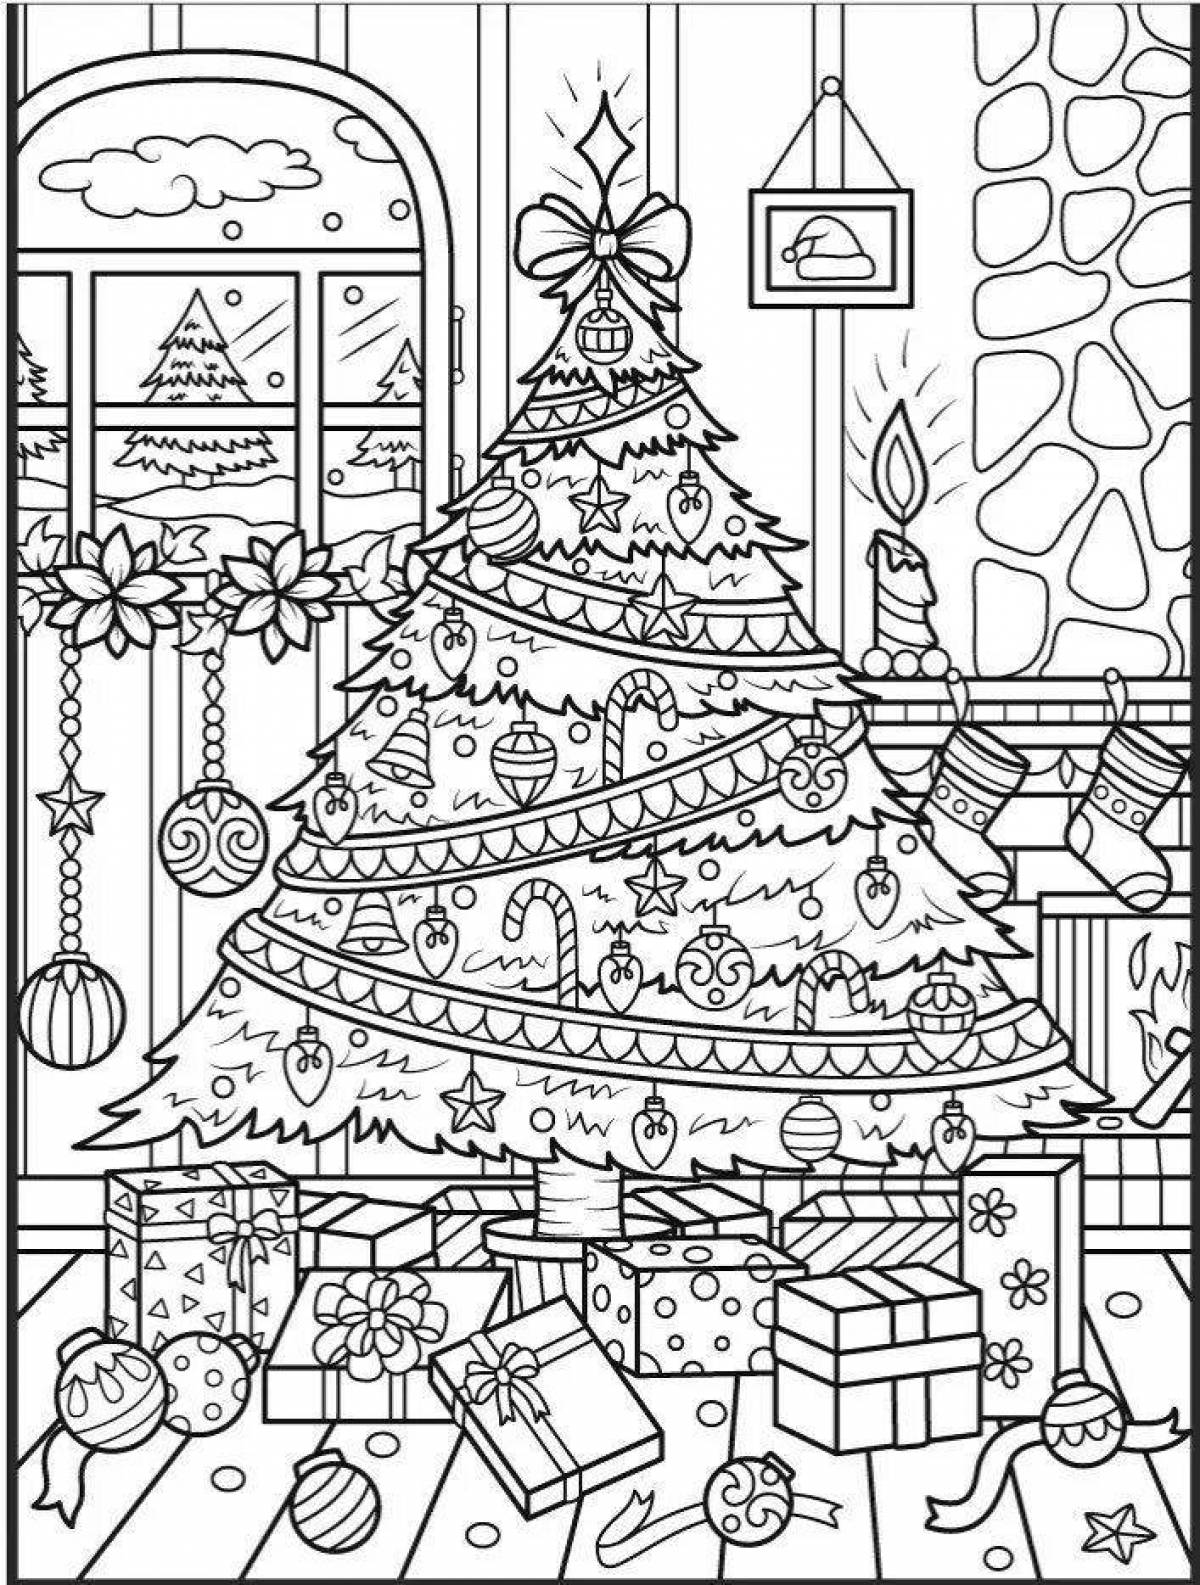 Fabulous big tree coloring page